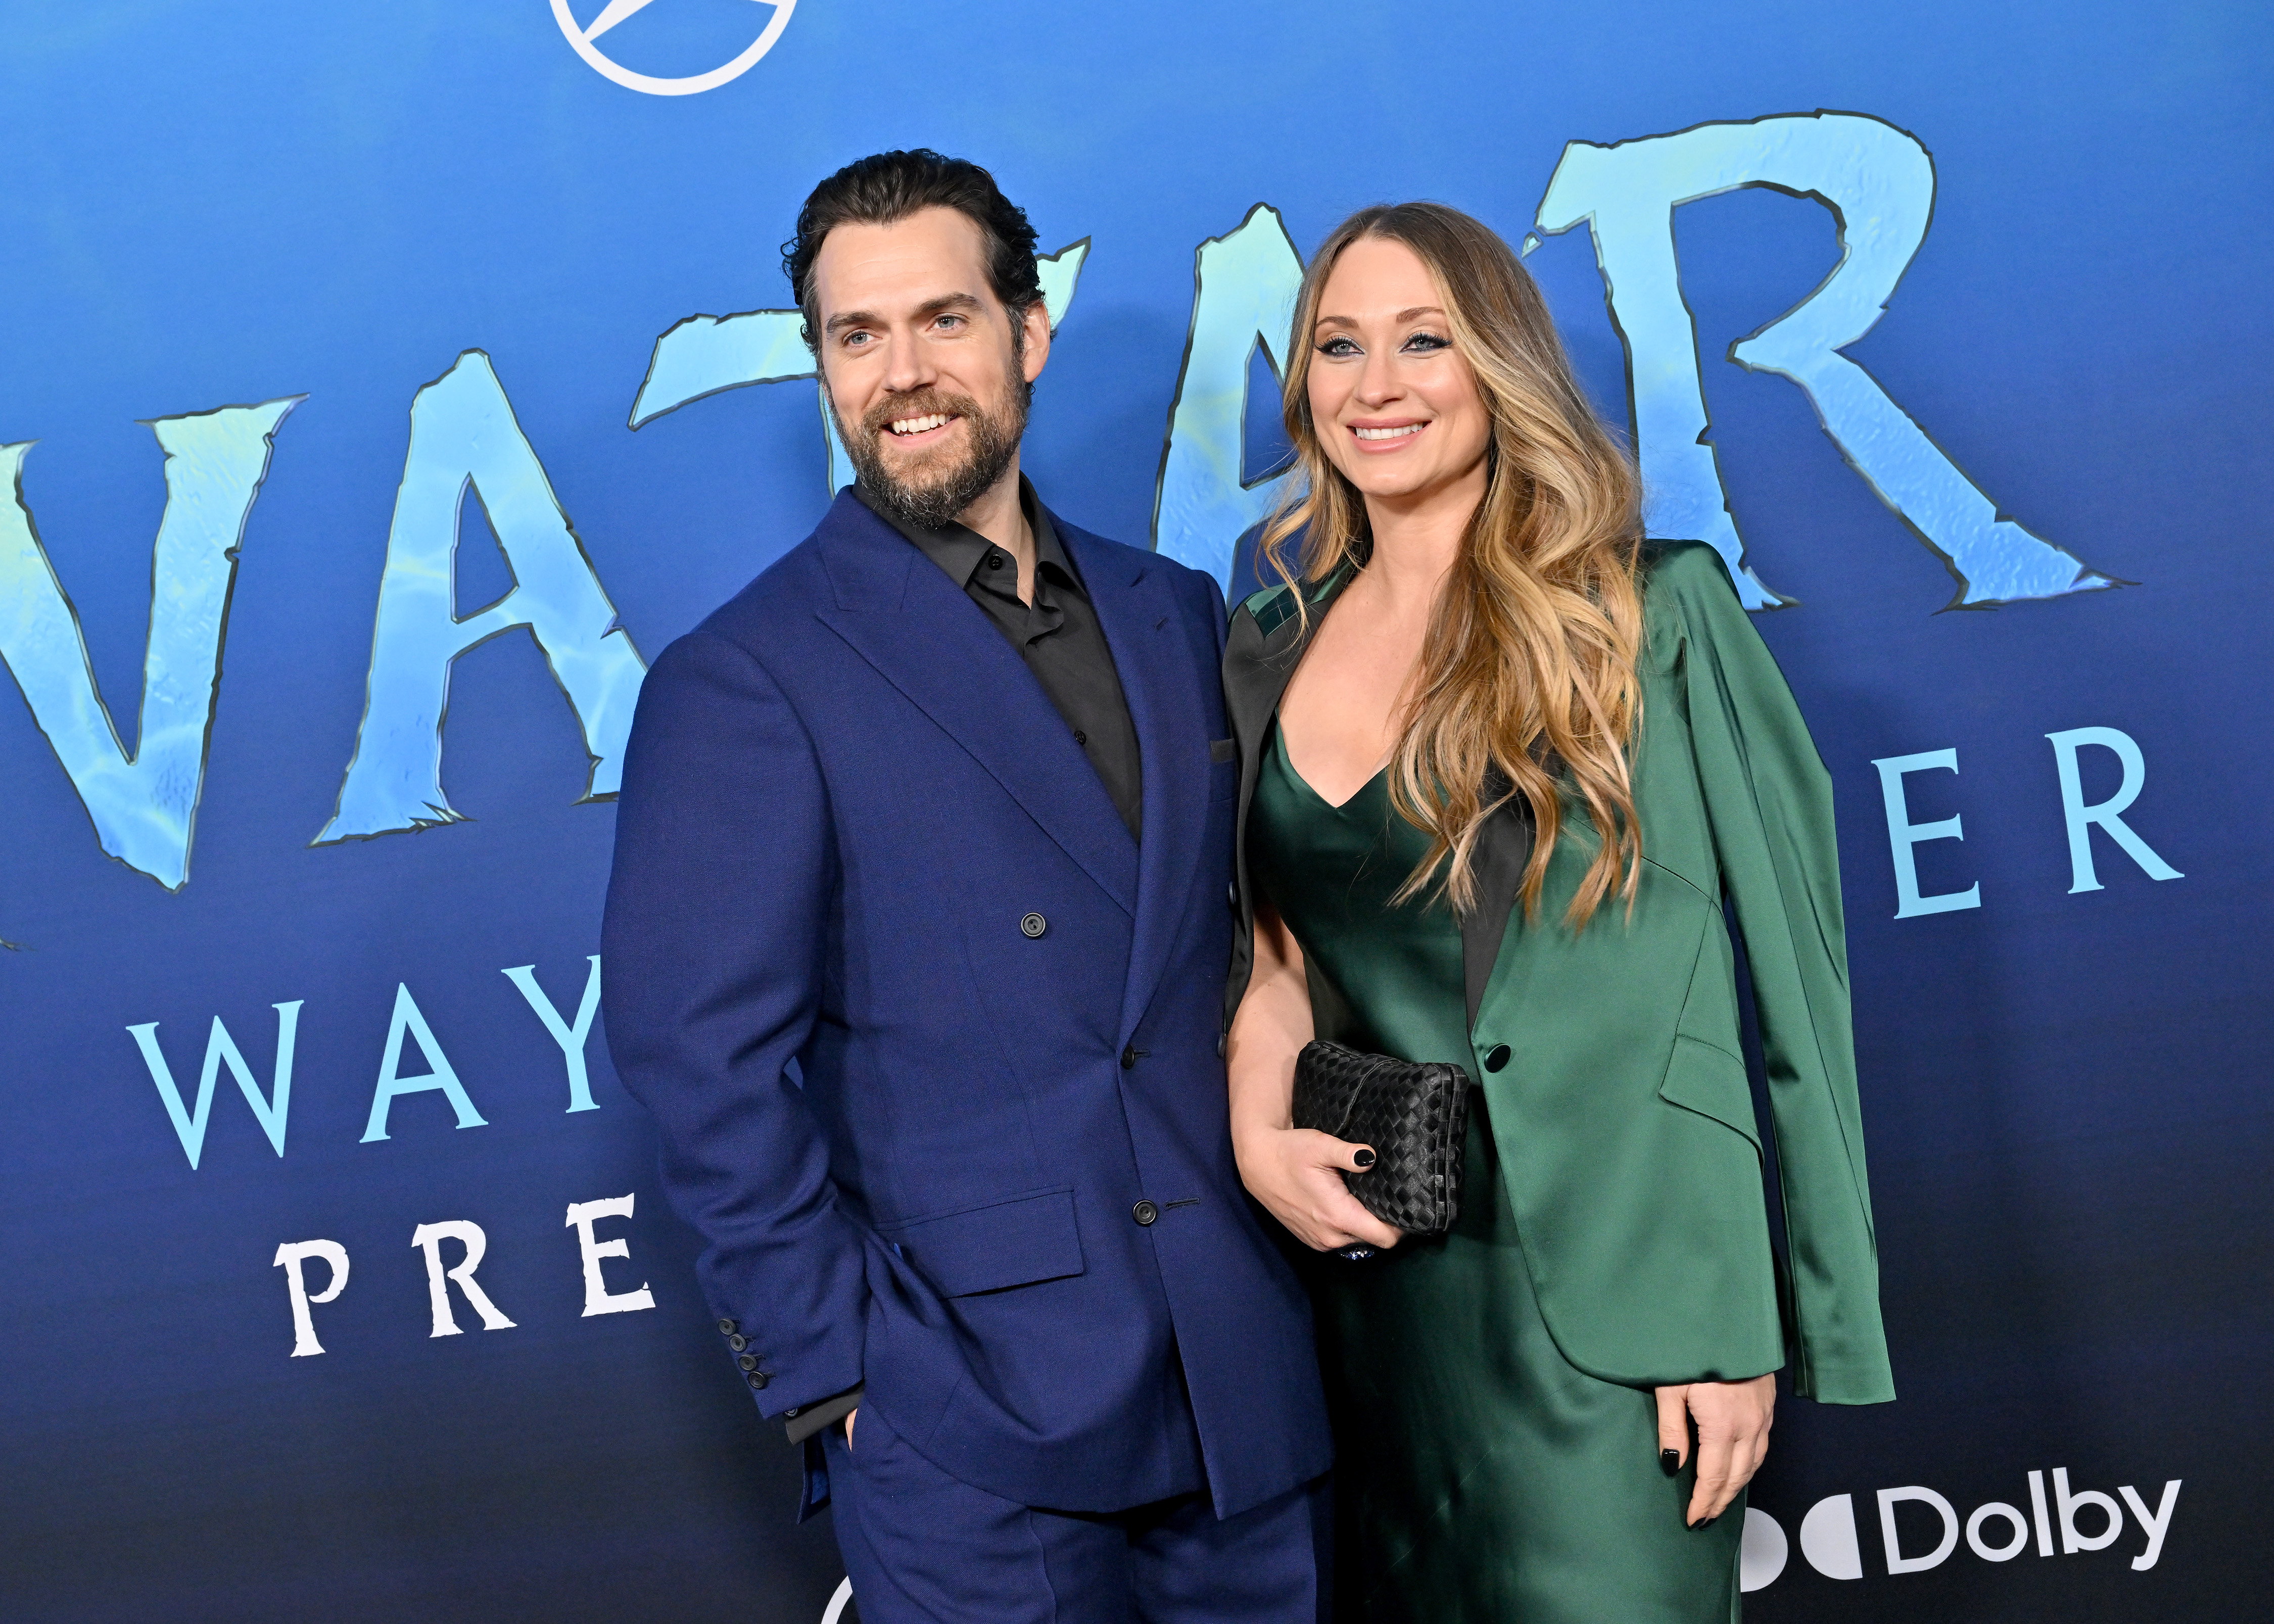 Henry Cavill and Natalie Viscuso at the premiere of "Avatar 2: The Way of Water" on December 12, 2022, in Hollywood, California. | Source: Getty Images